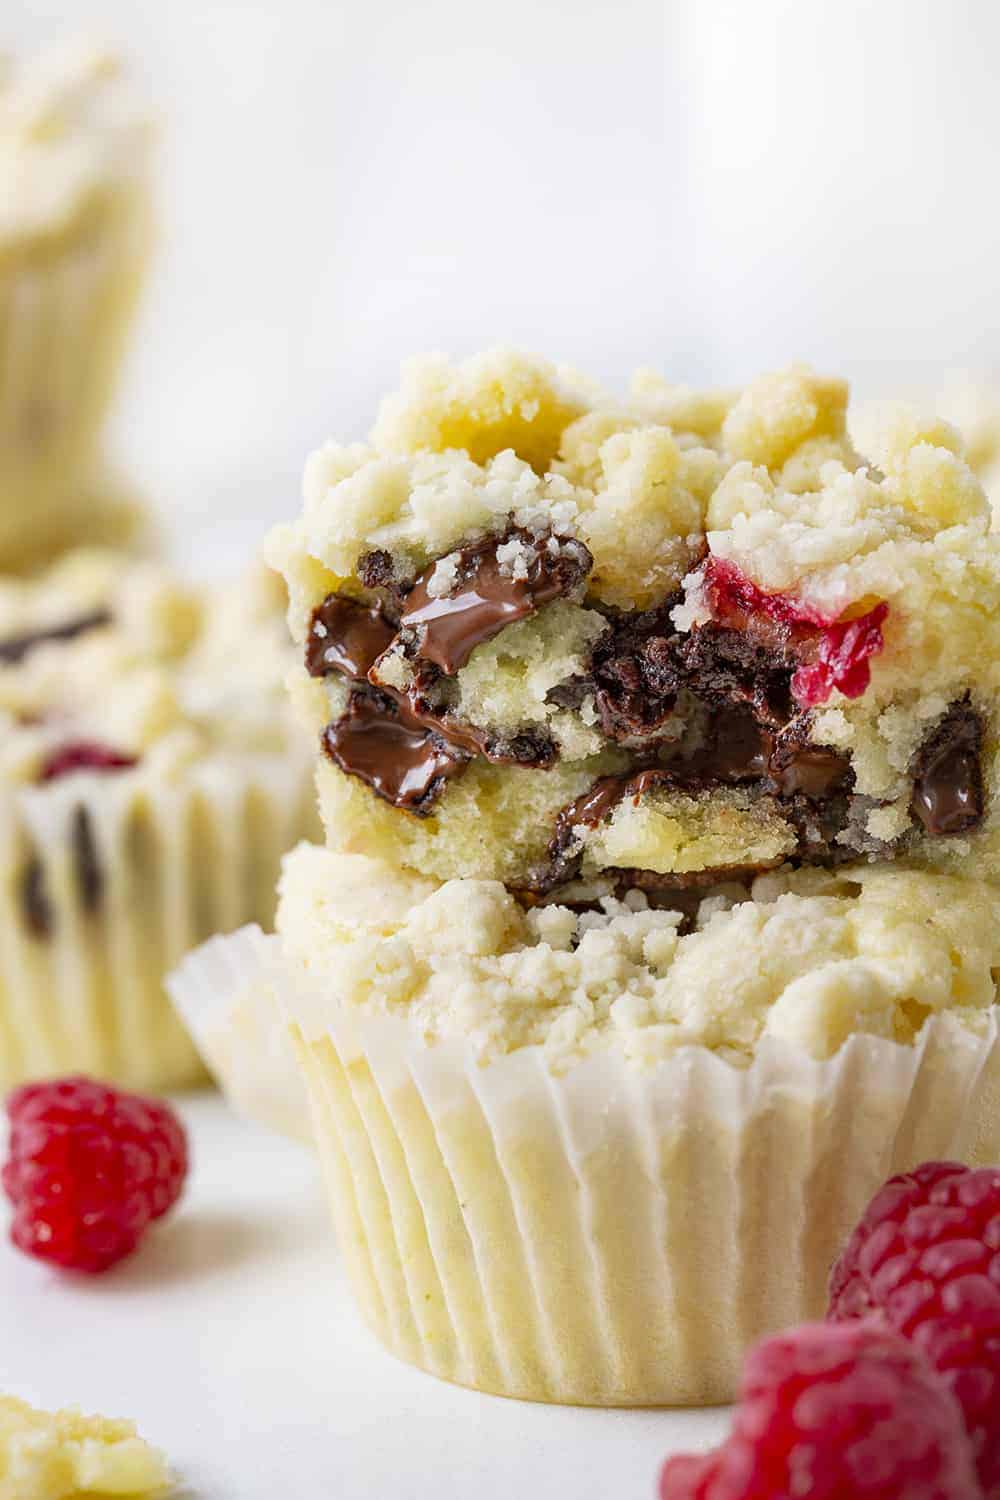 Raspberry Chocolate Muffin Stacked and Showing Inside